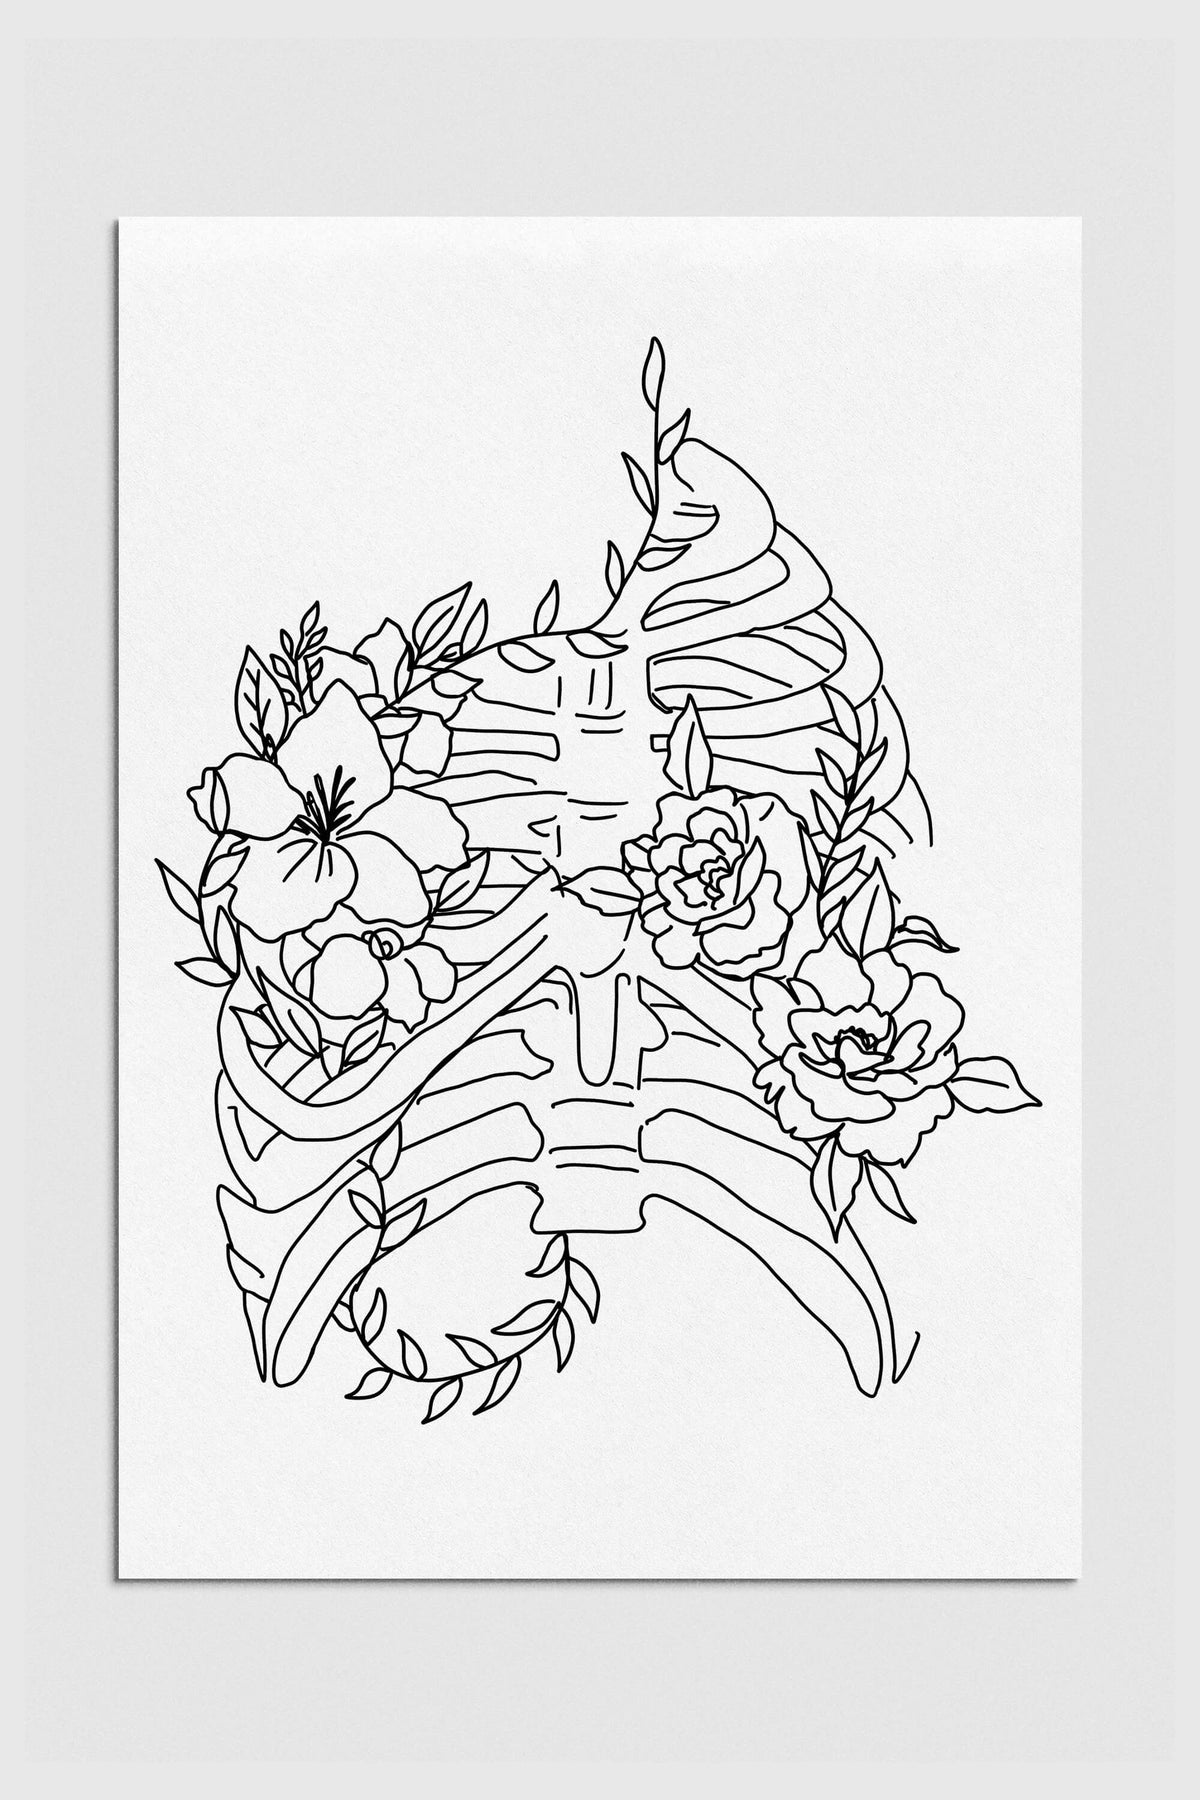 Elegant monochrome floral anatomy art print designed for therapy offices. Delicate skeletal beauty entwined with blooming flowers on canvas. Perfect for creating a calming and harmonious atmosphere.